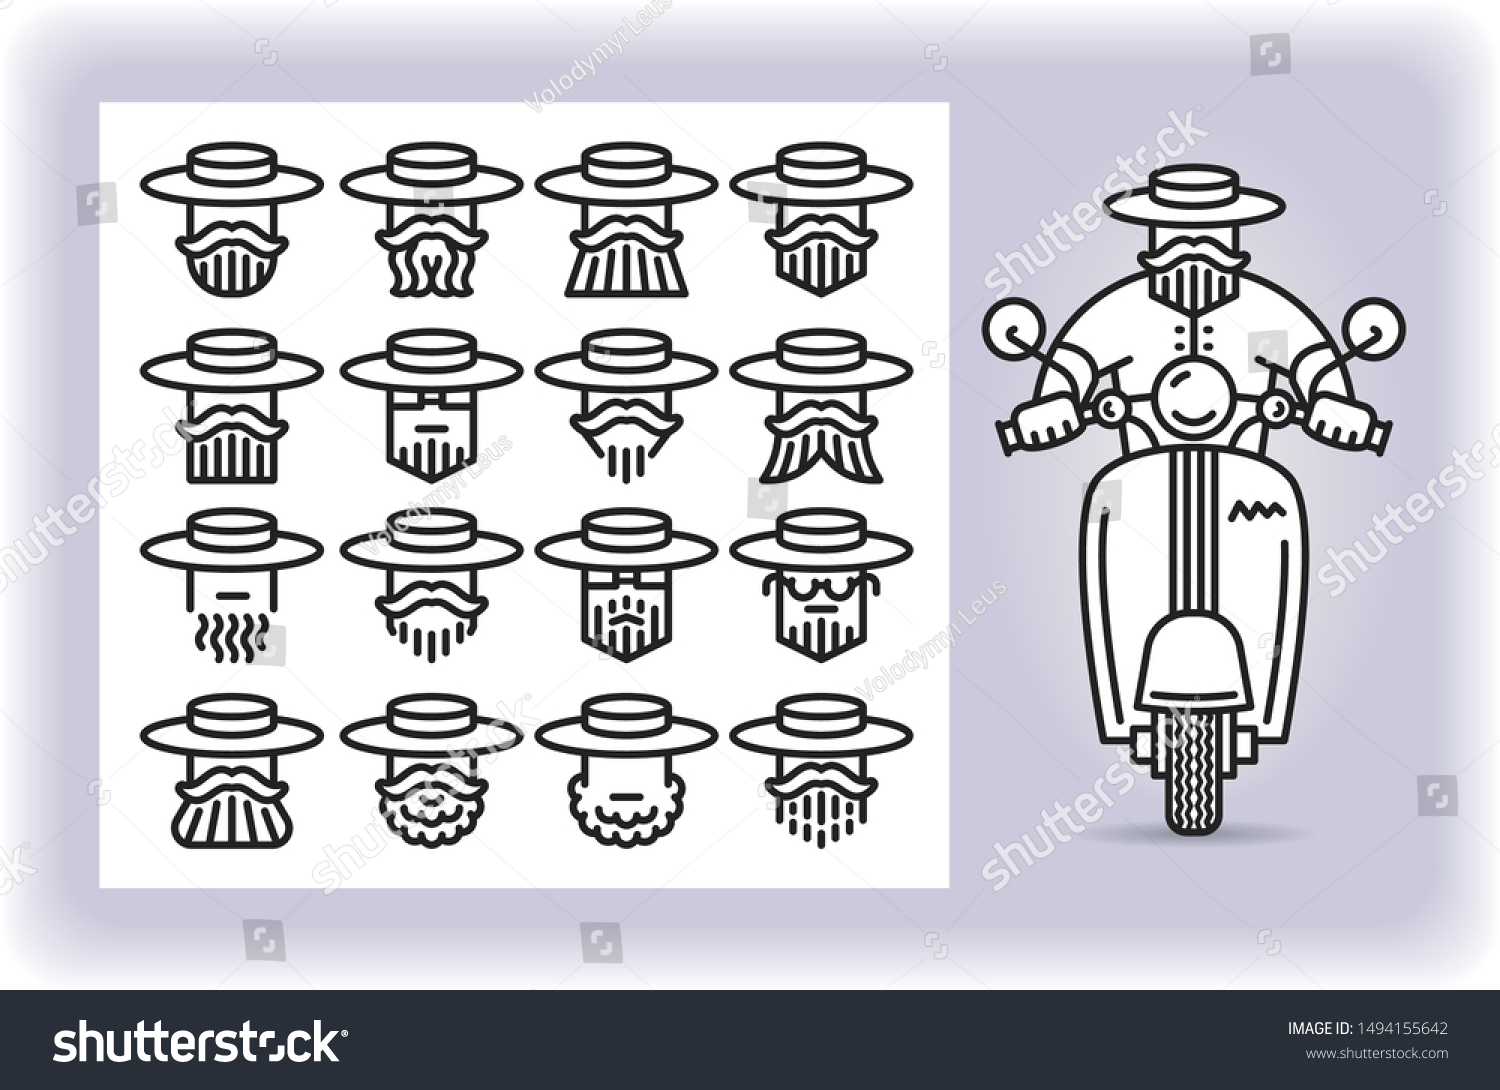 SVG of Redactable picture of person with mustache and beard wearing a amish hat that riding by scooter and set of sixteen replaceable icons of that driver heads isolated on white. Emoji and avatars. svg